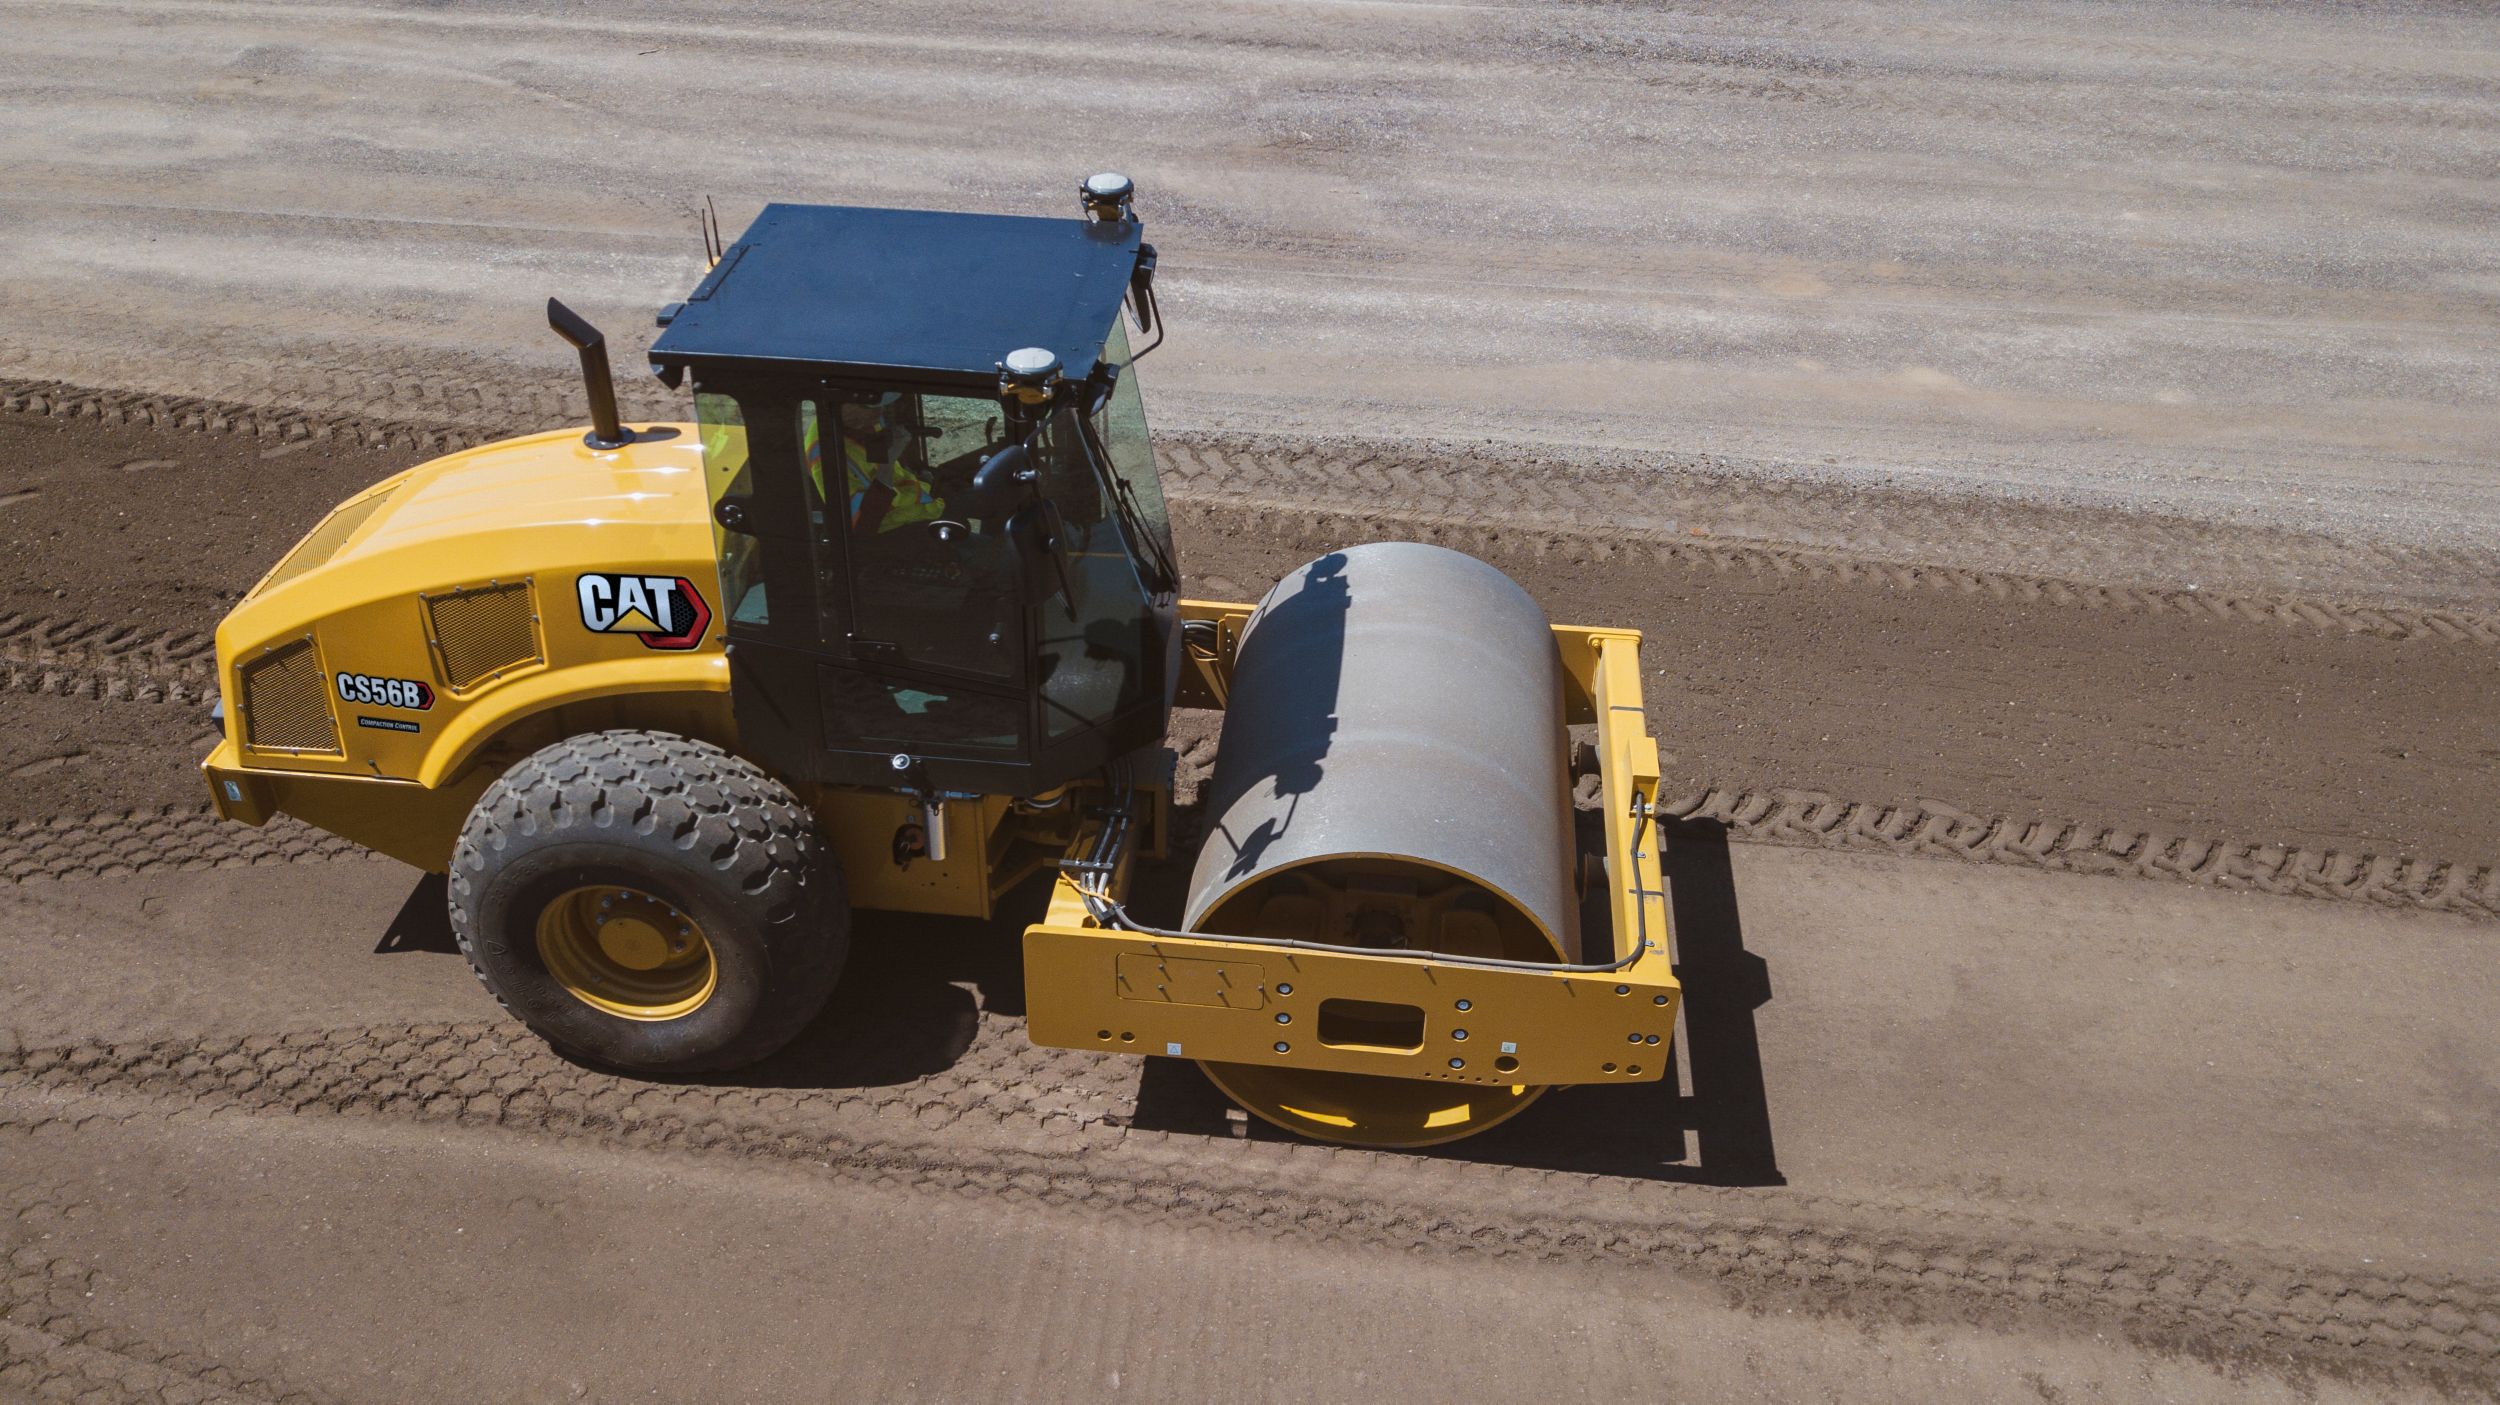 Consistent Compaction through Automation Technology